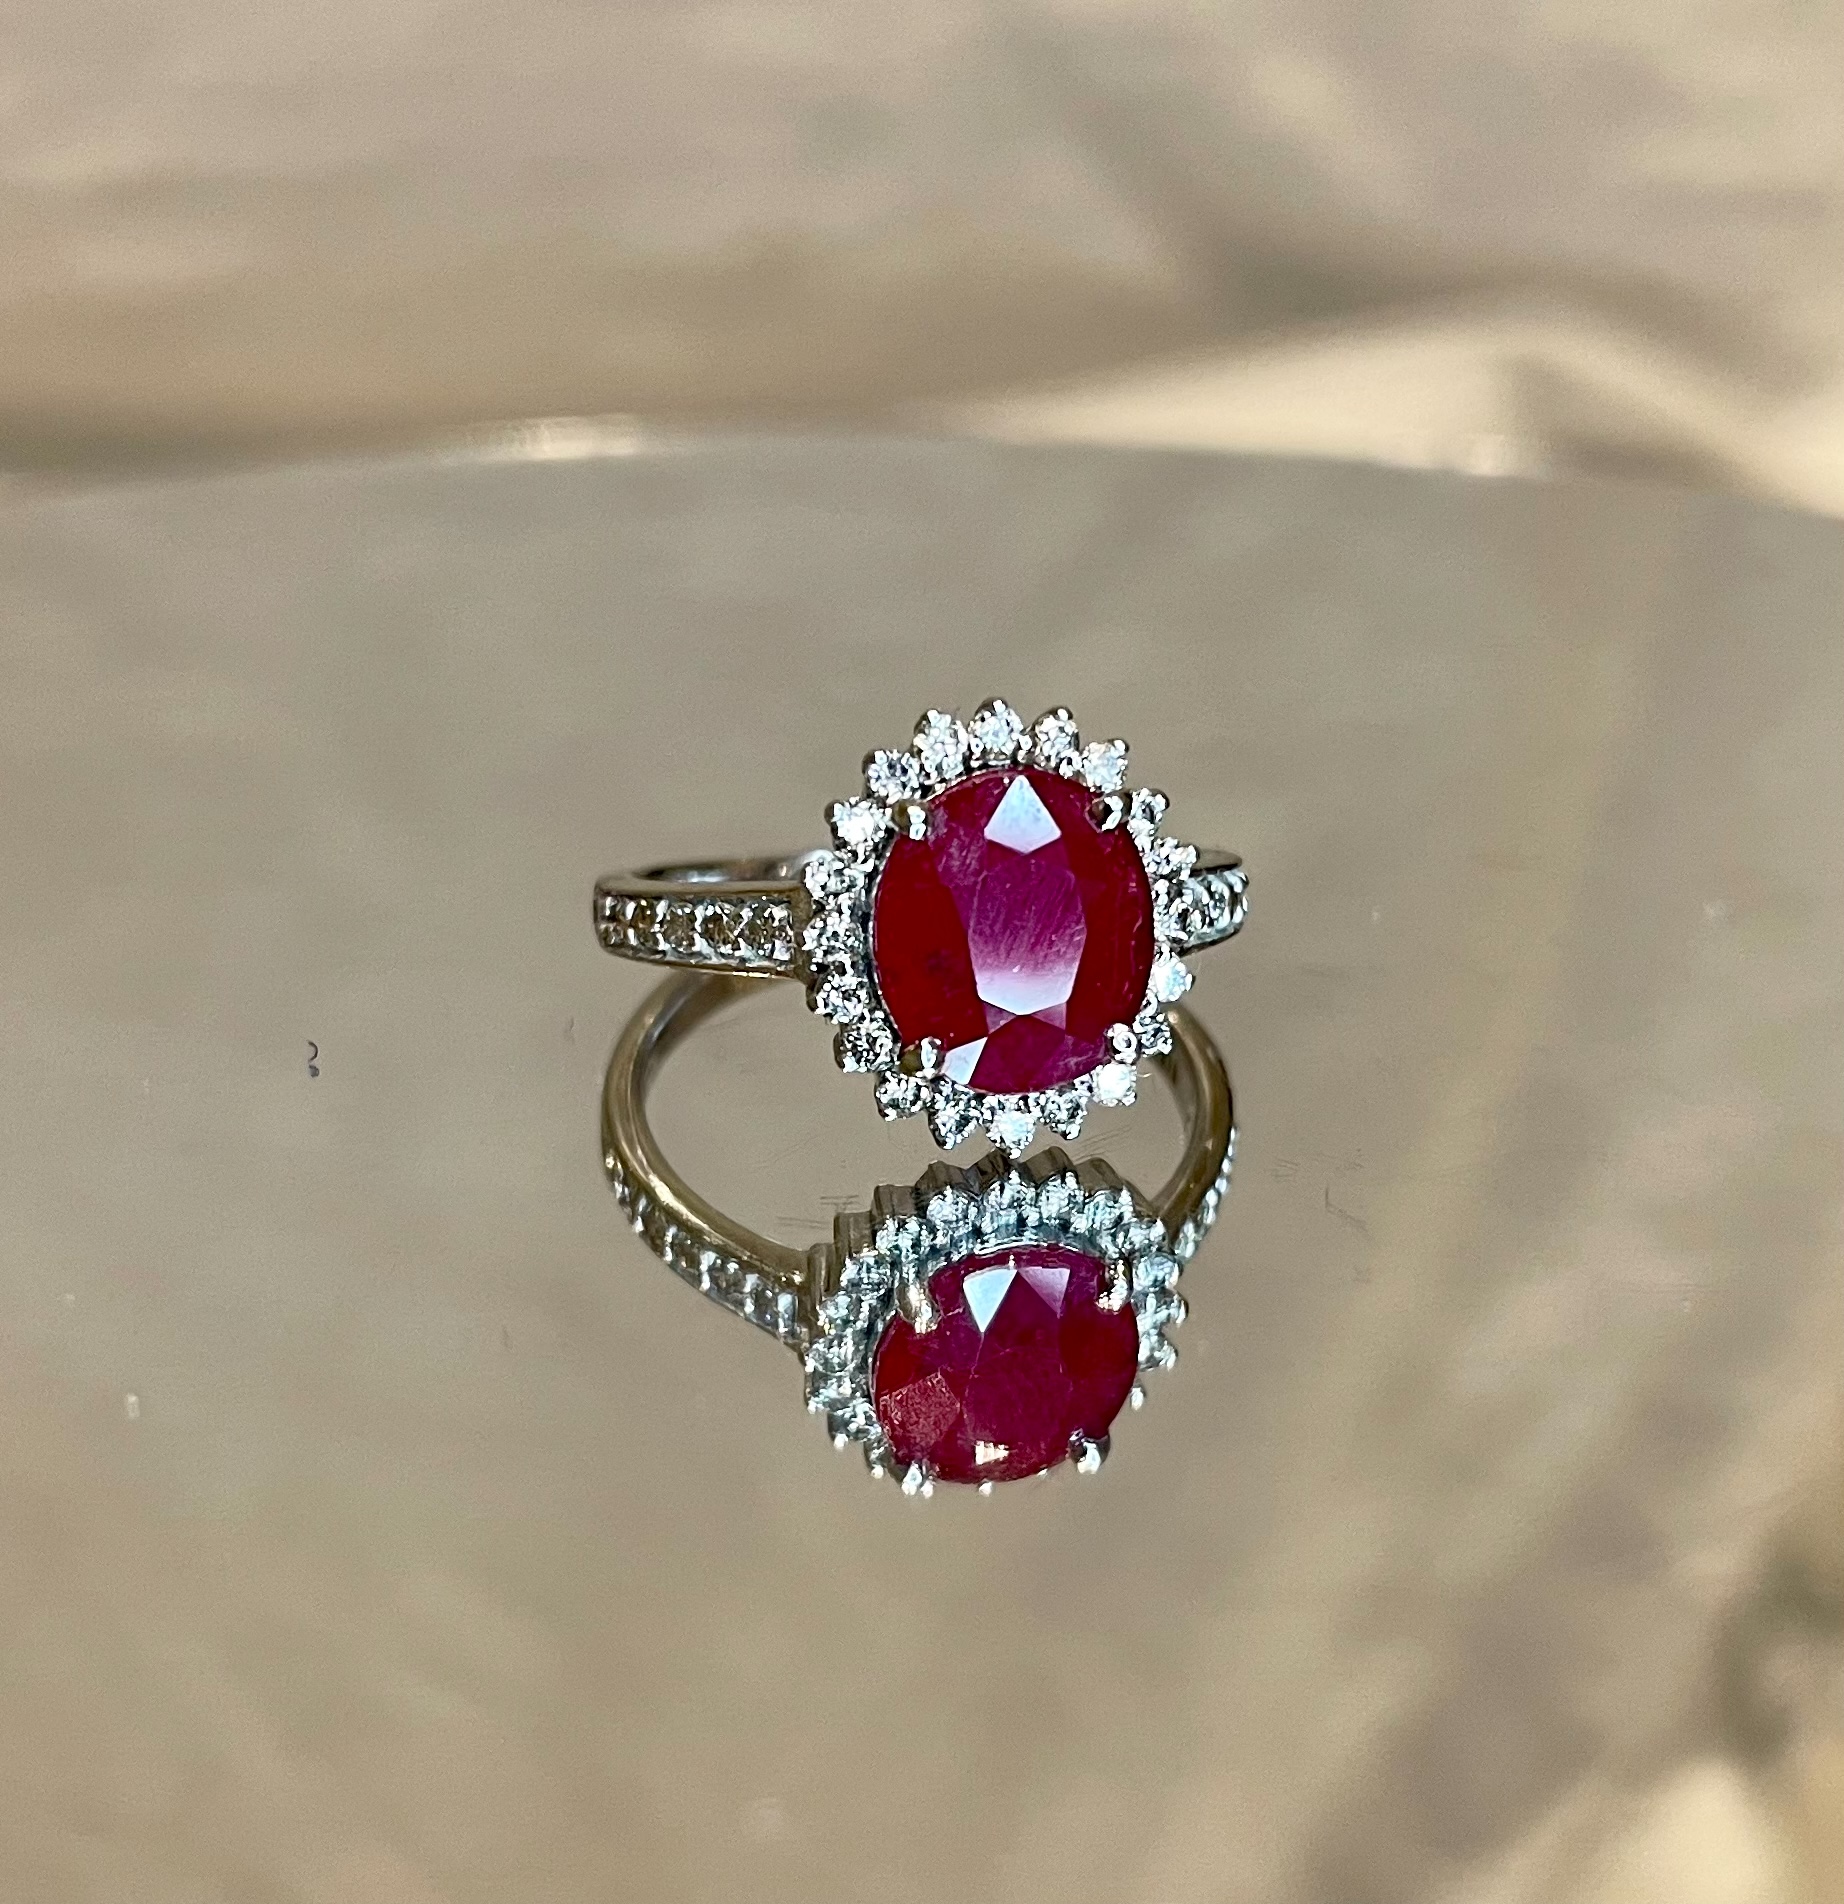 Natural Burmese Ruby Ring 2.15 Ct With Natural Diamonds & 18kGold - Image 2 of 5